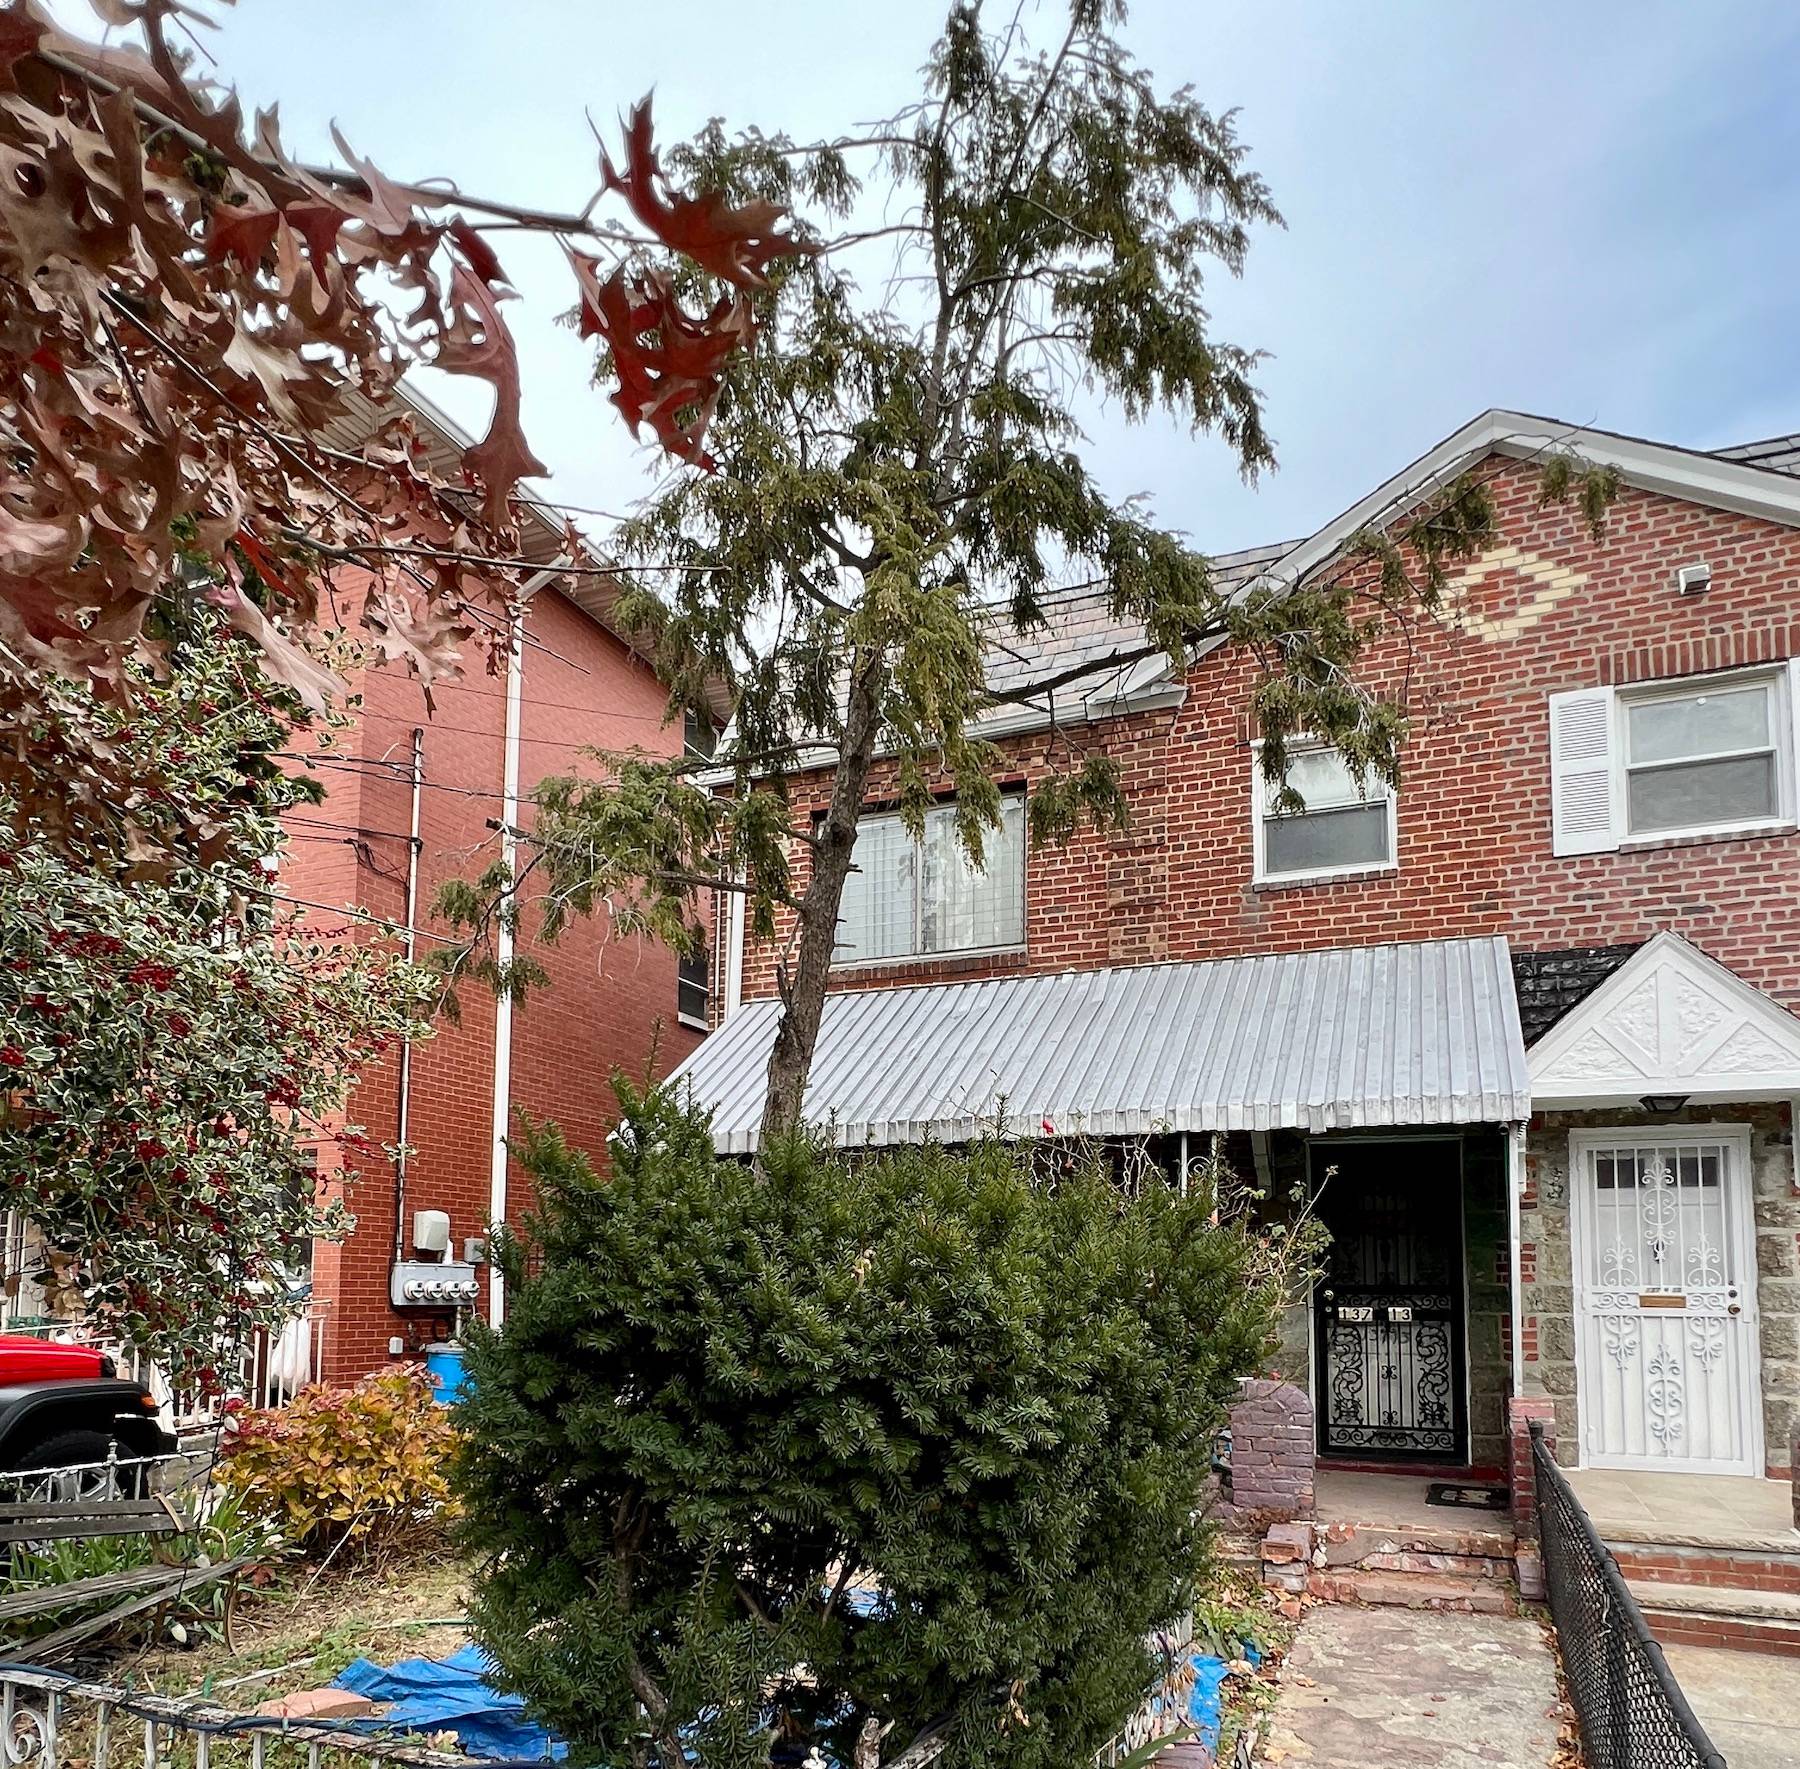 Semi detached Brick house in great location, Lot size 20 x 100, 3BR 2 Bath, 1, 320 SF living space plus basement and attached garage, and space outside garage can ...